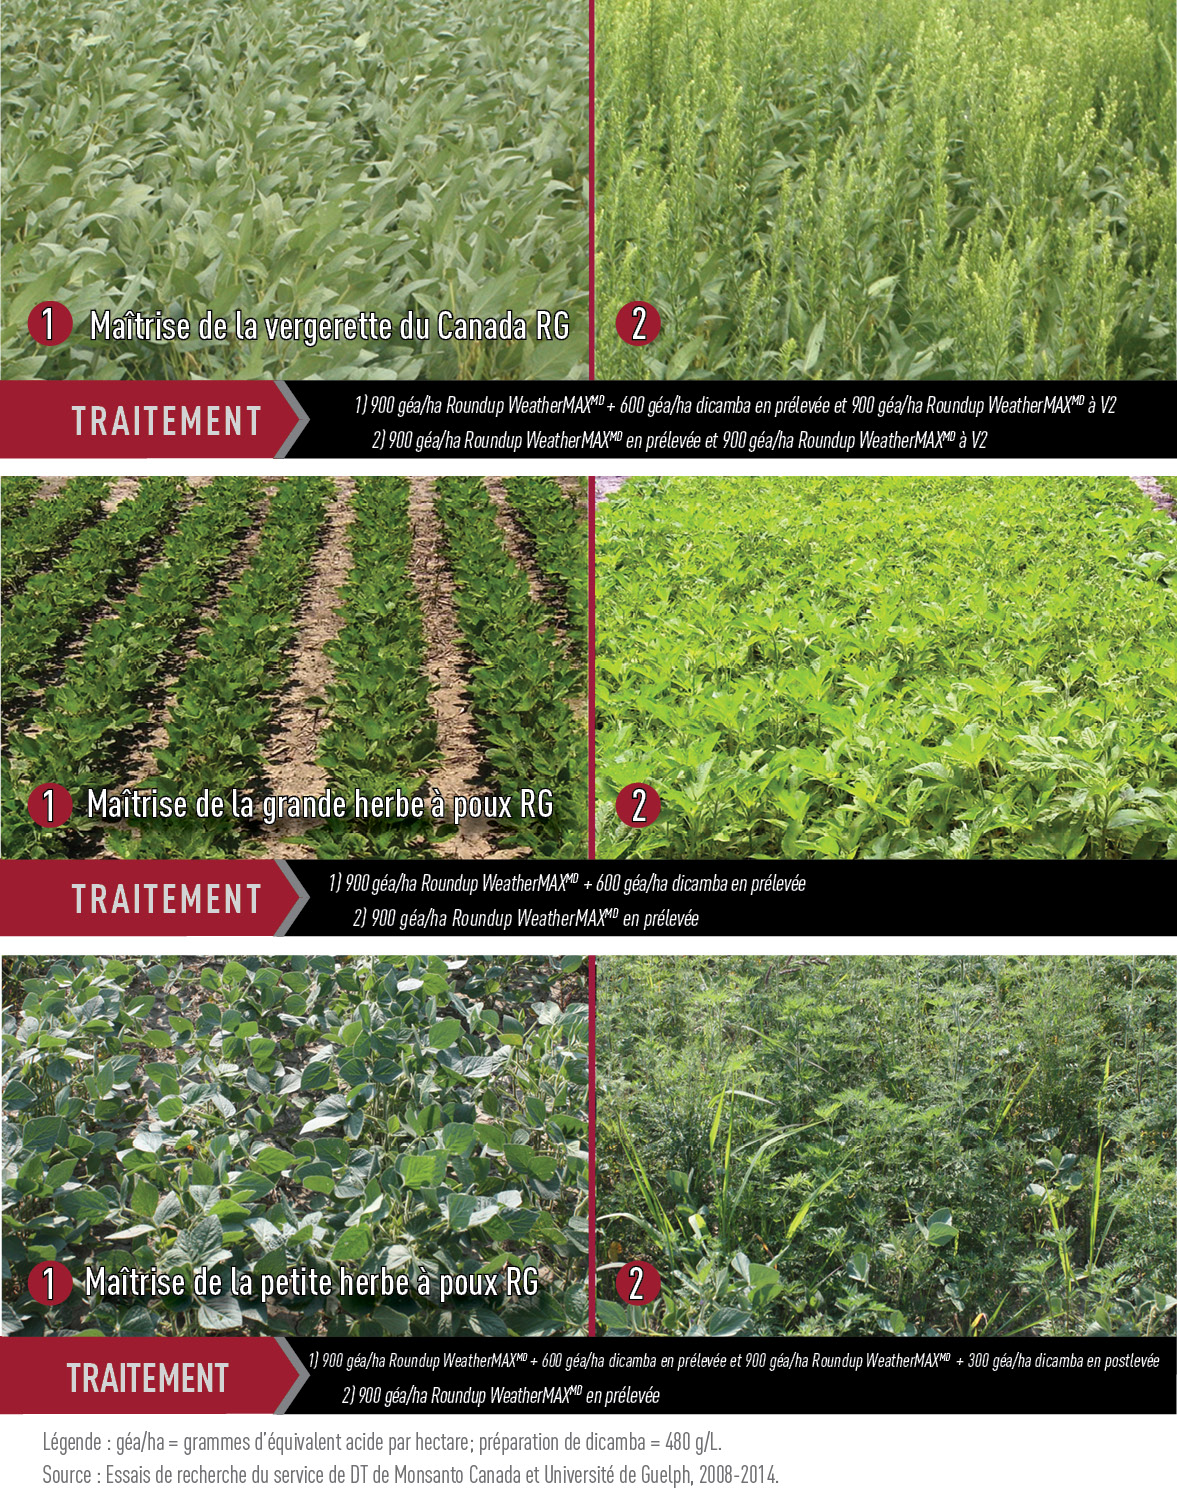 Field Trials Demonstrate Dicamba Efficacy